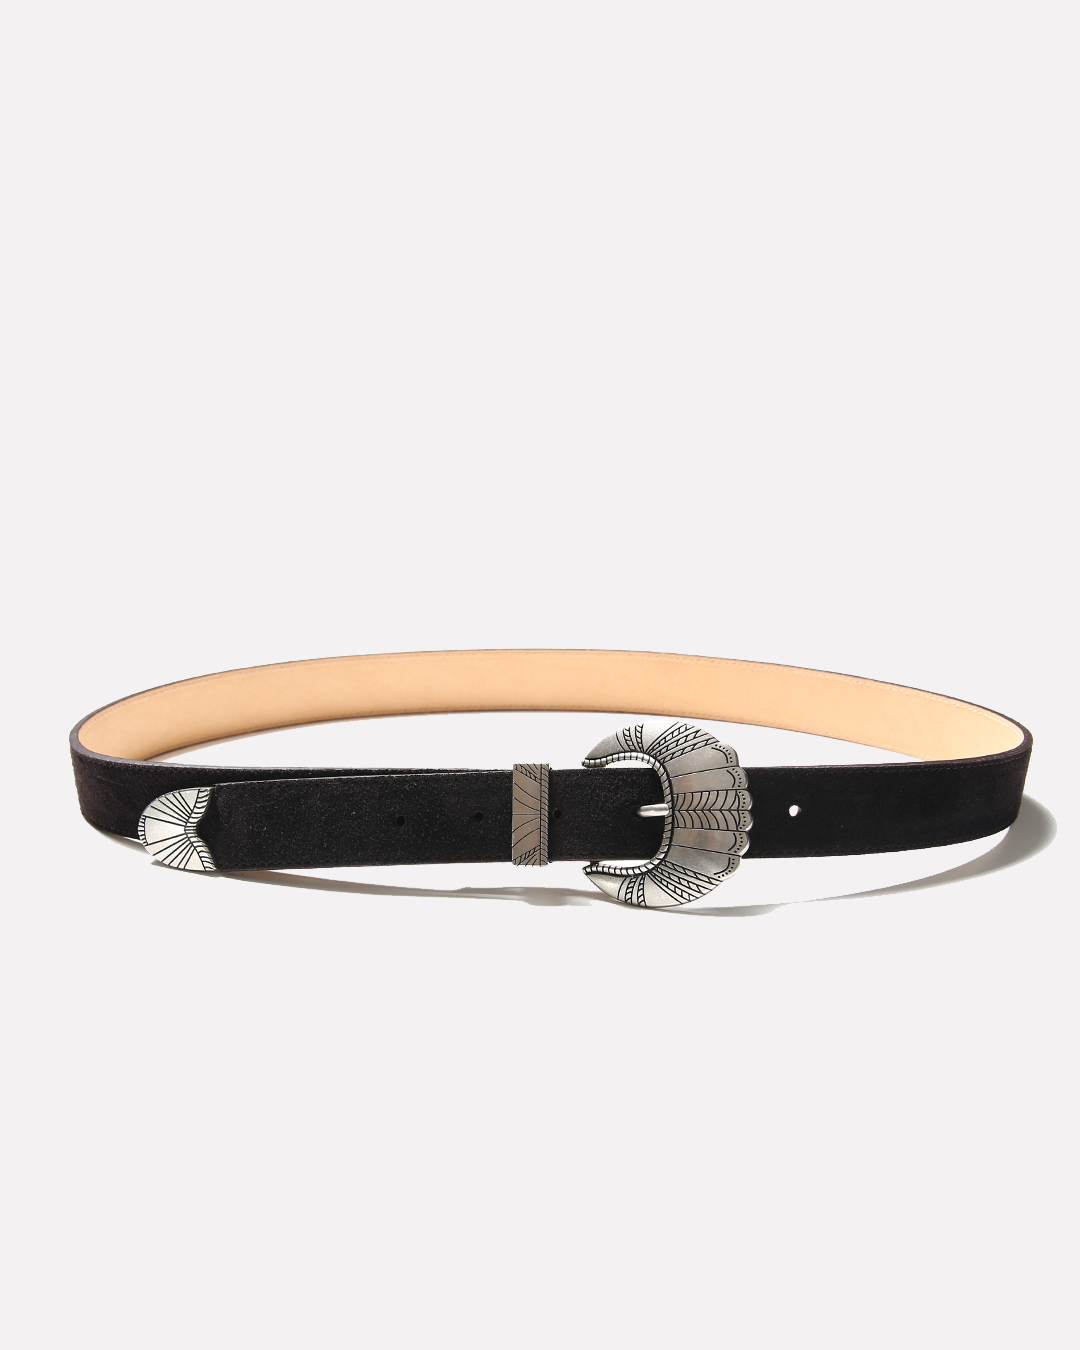 Indian Shell Buckle Belt (Suede Brown)